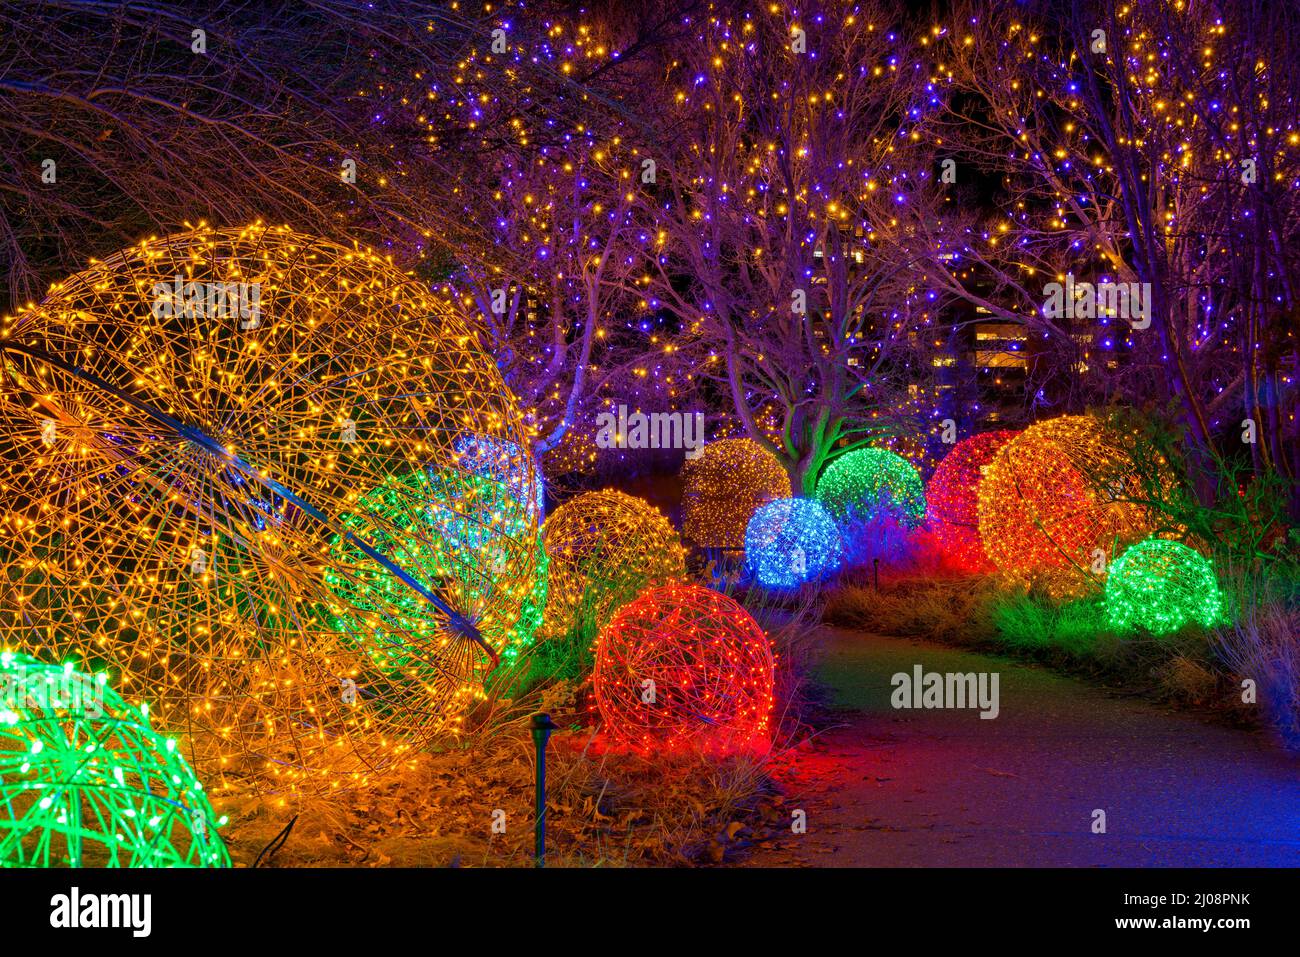 Path of Lights - A night view of a winding path lit by colorful lights at Denver Botanic Gardens during its holiday Blossoms of Light event. Co, USA. Stock Photo